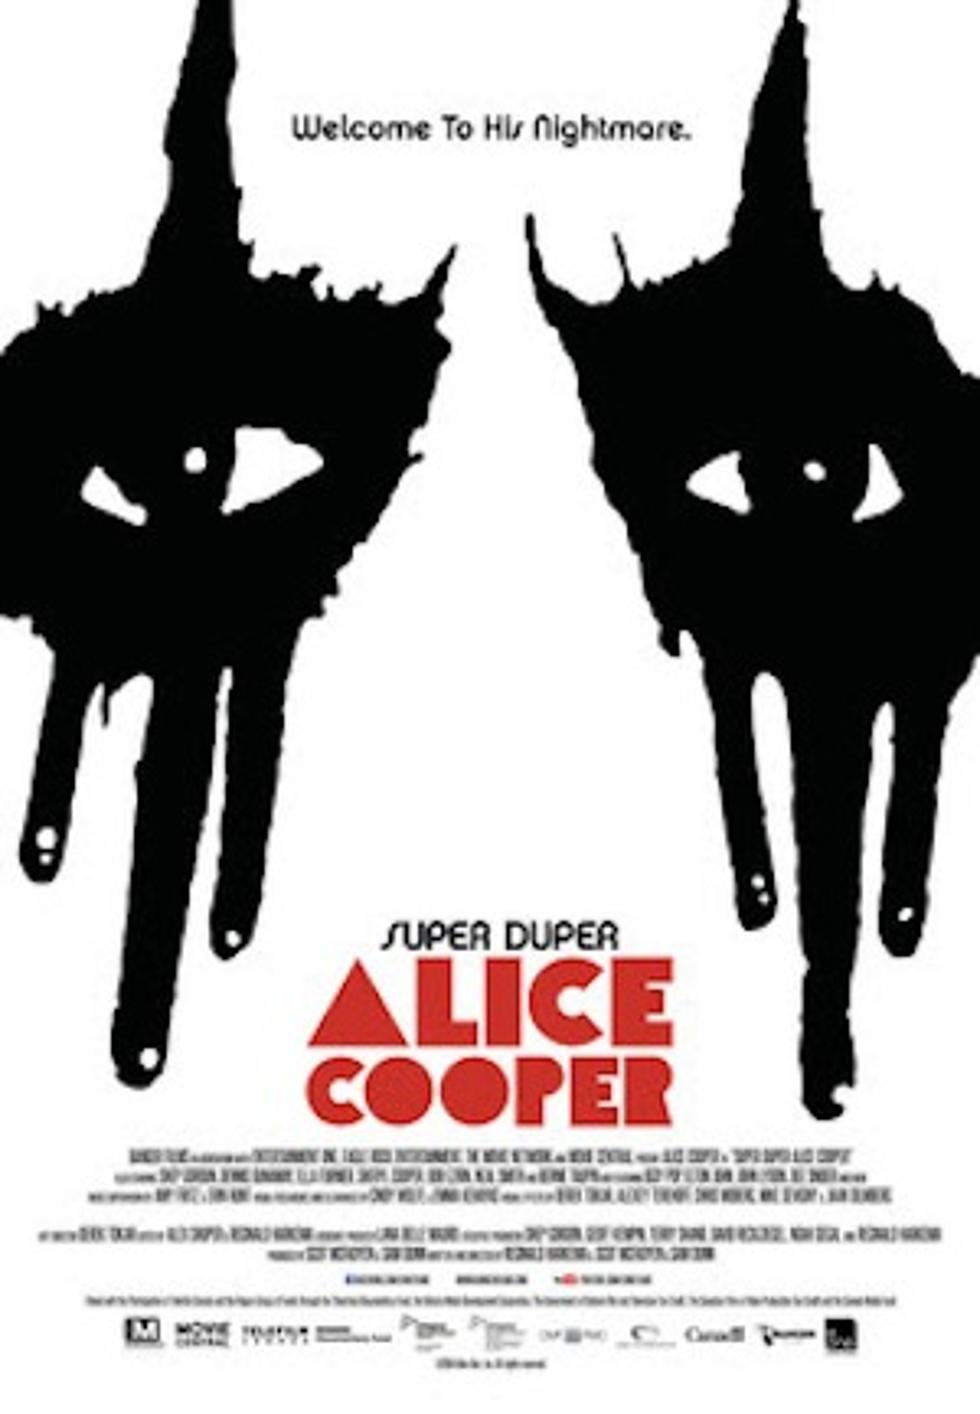 &#8216;Super Duper Alice Cooper&#8217; Documentary to Be Released on DVD + Blu-ray